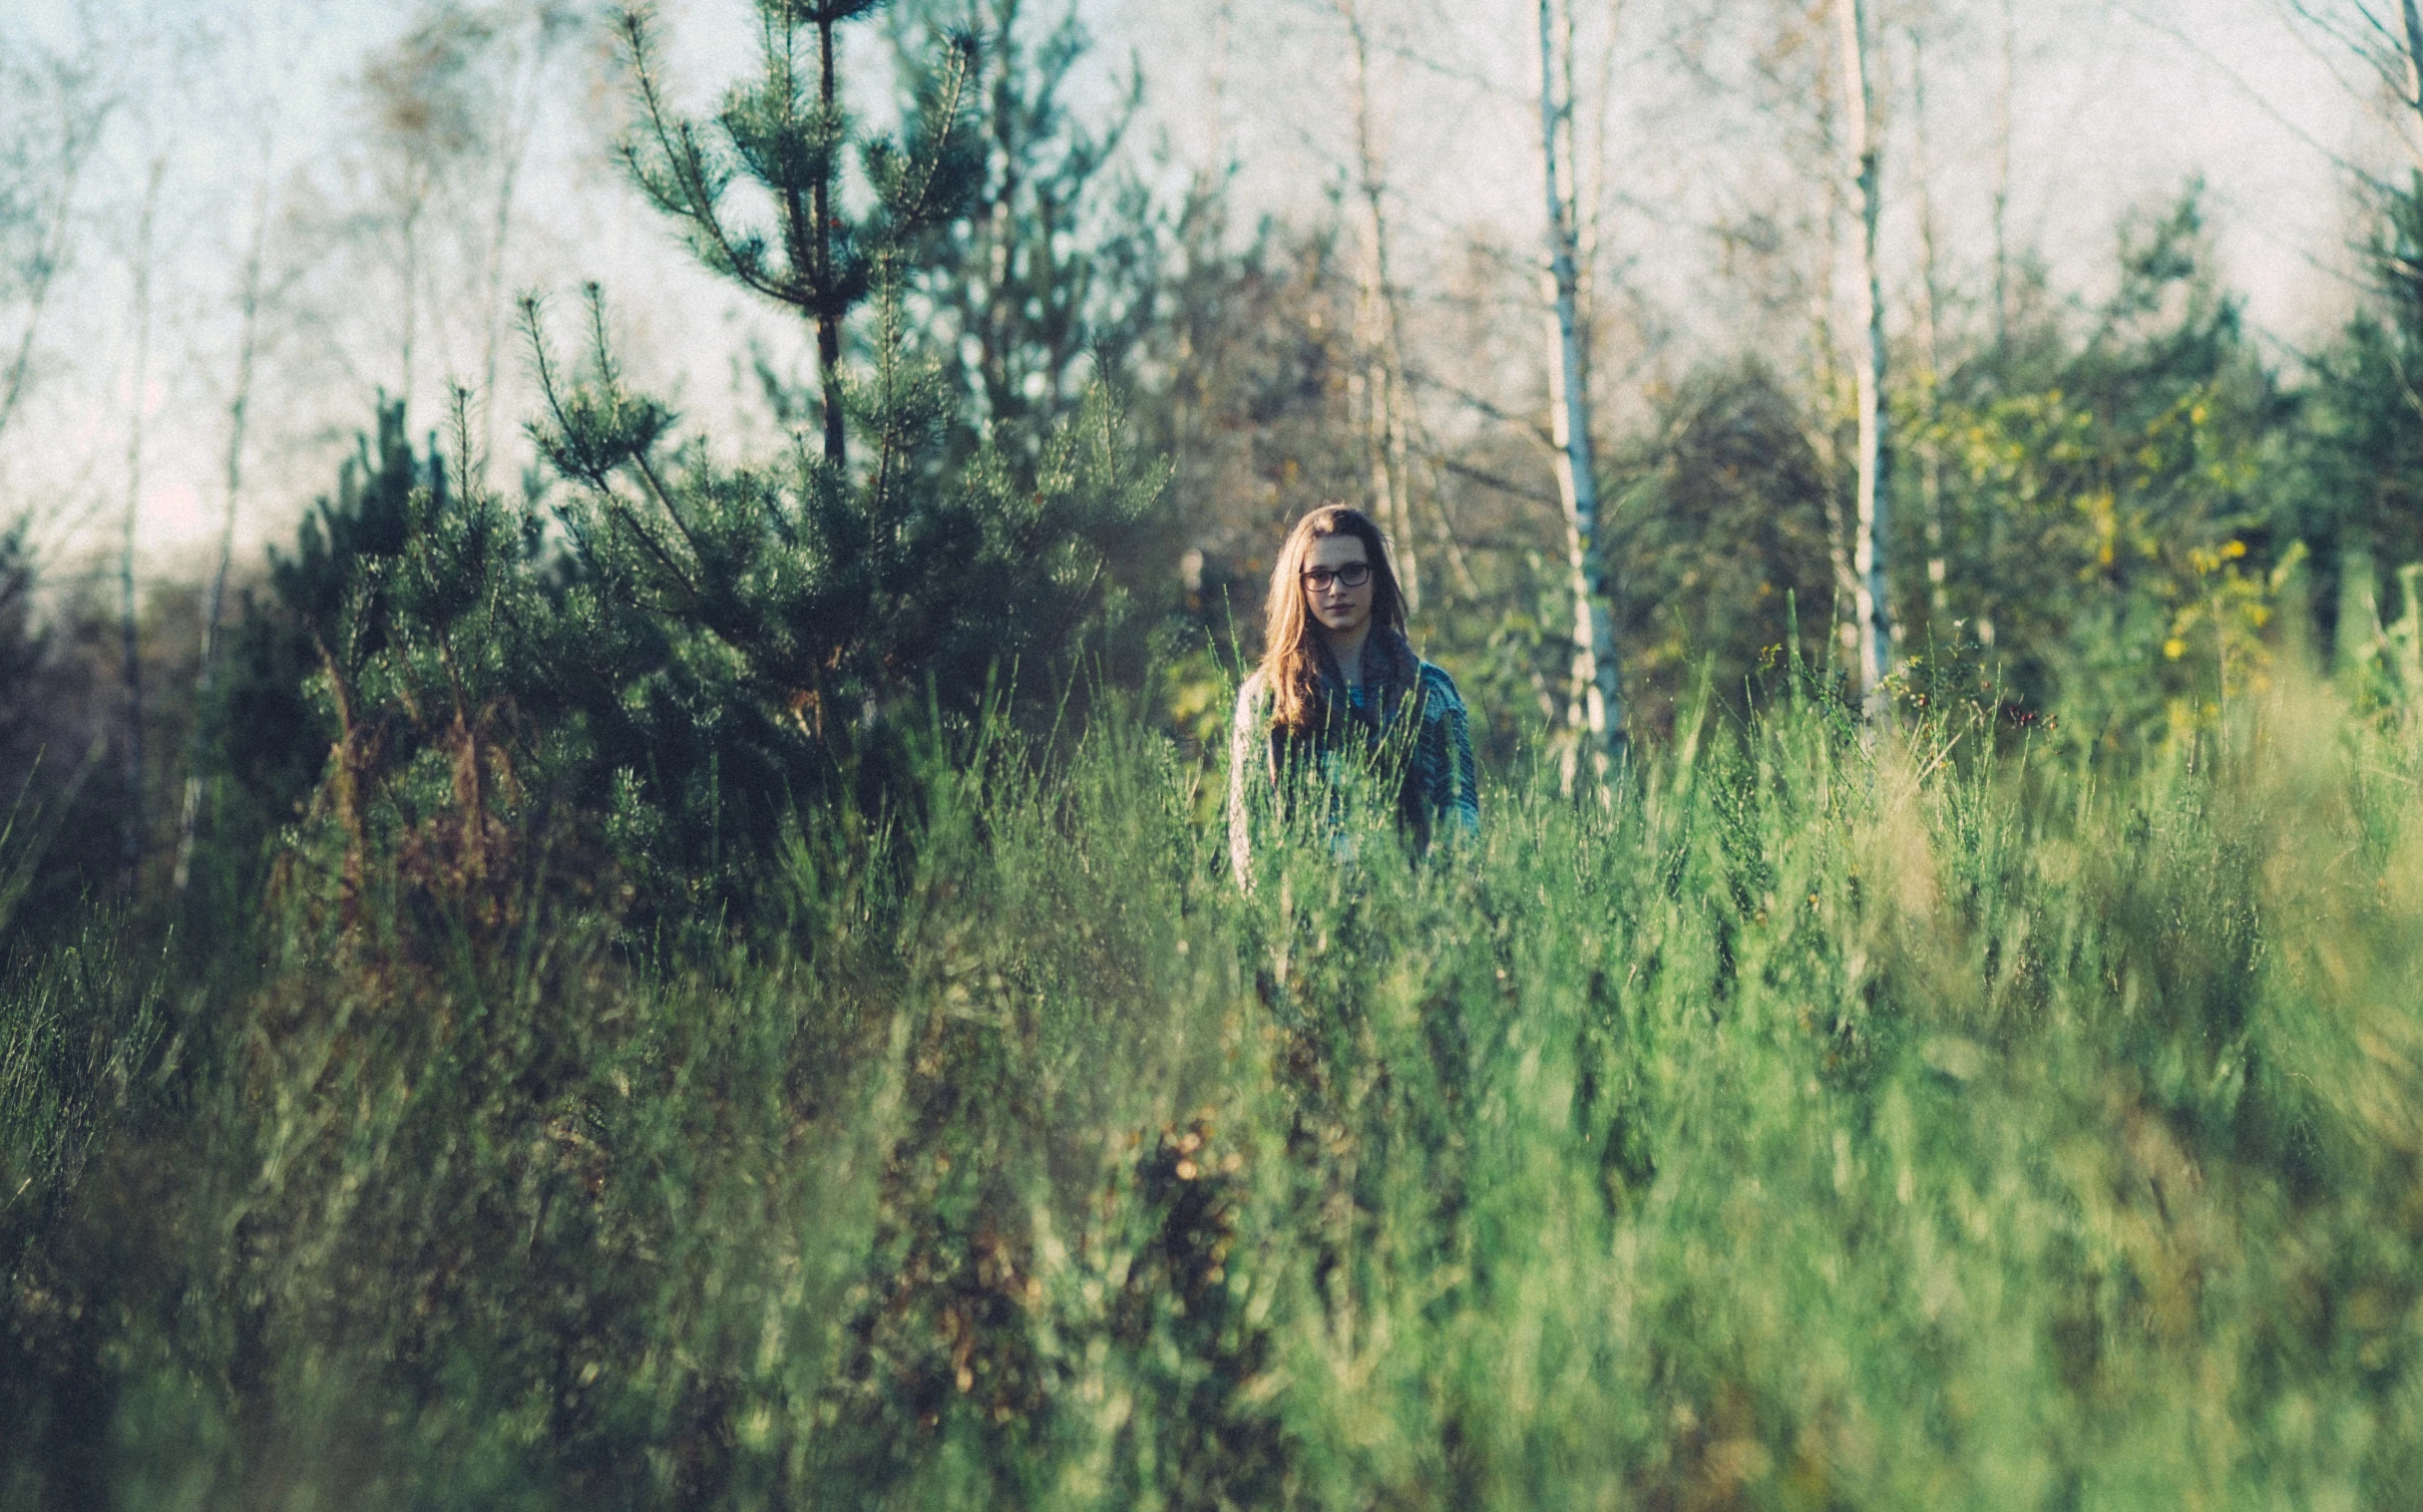 a girl in blue shirt standing among trees and bushes